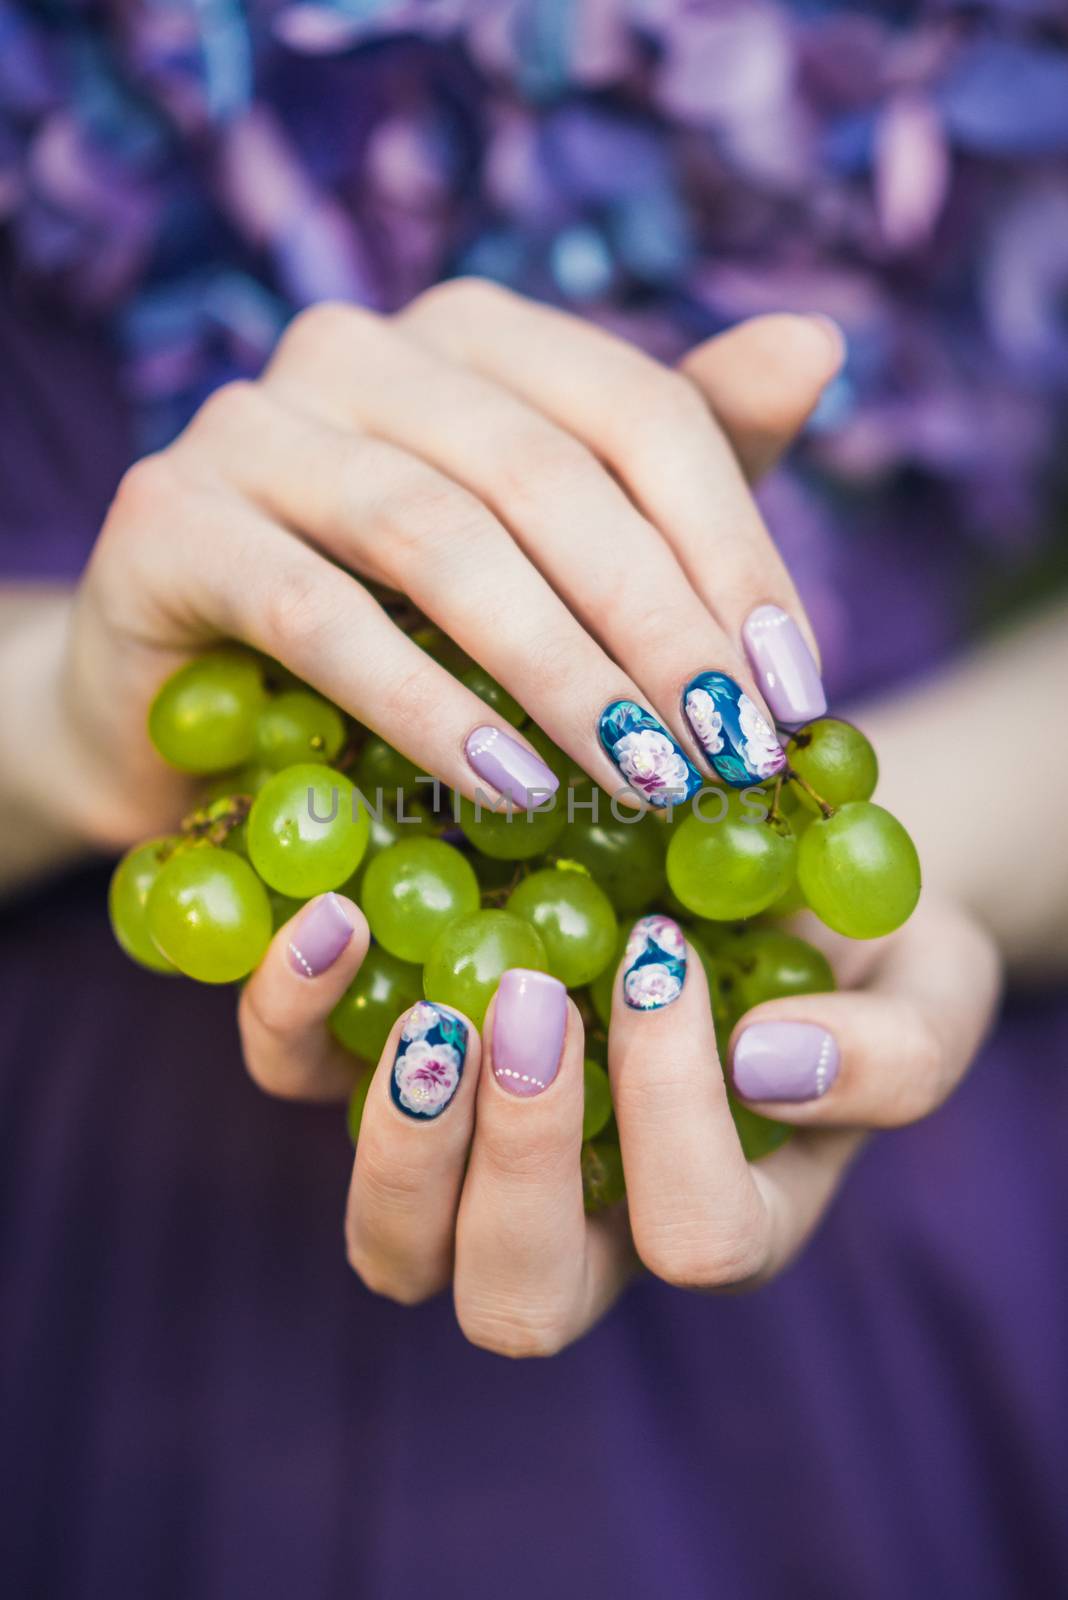 Hands with Nails Holding Grapes by okskukuruza